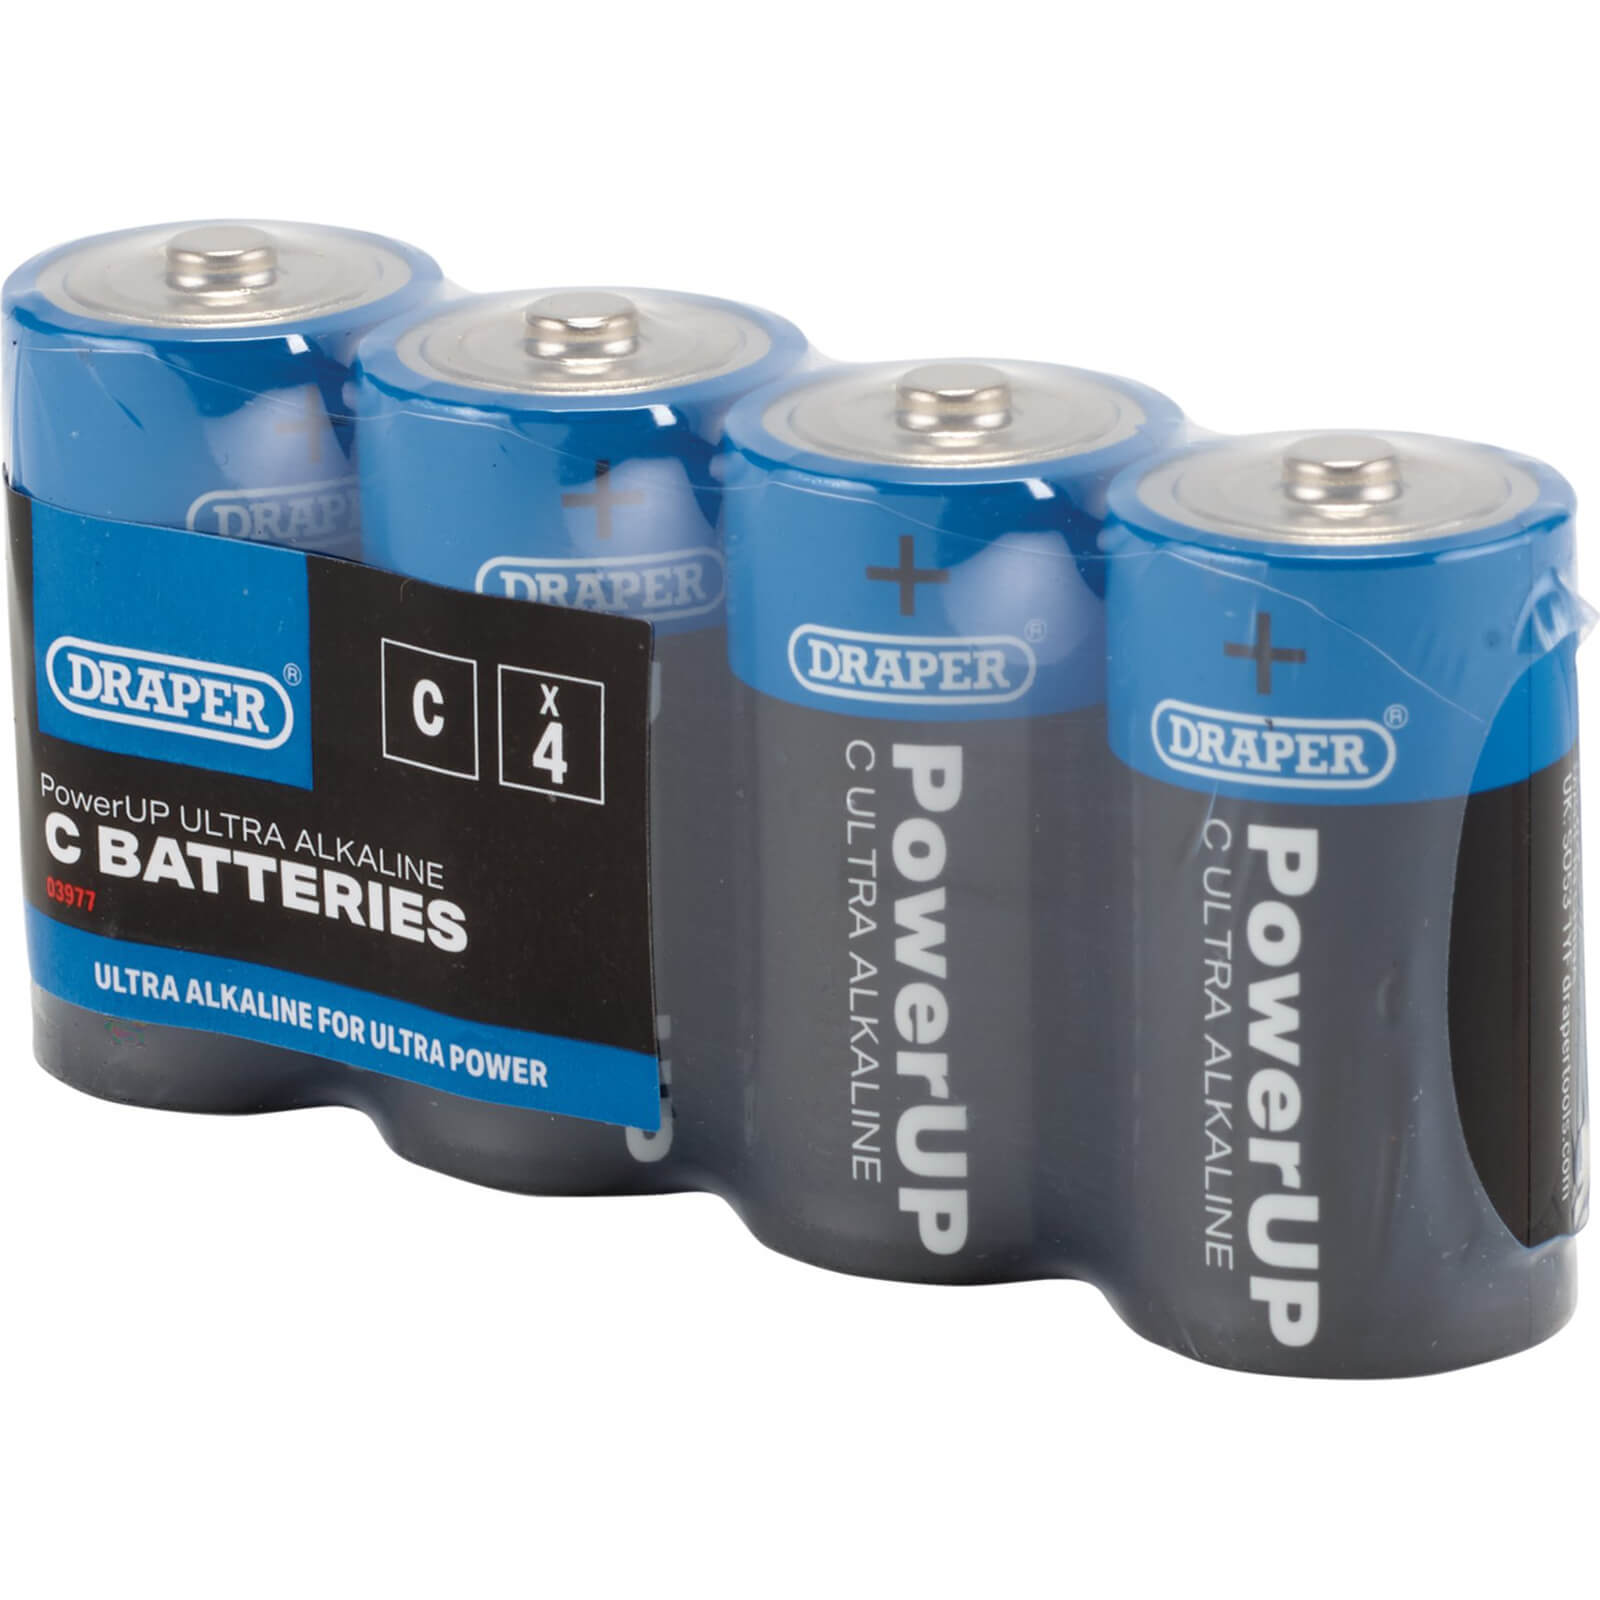 Image of Draper Powerup Ultra Alkaline C Cell Batteries Pack of 4